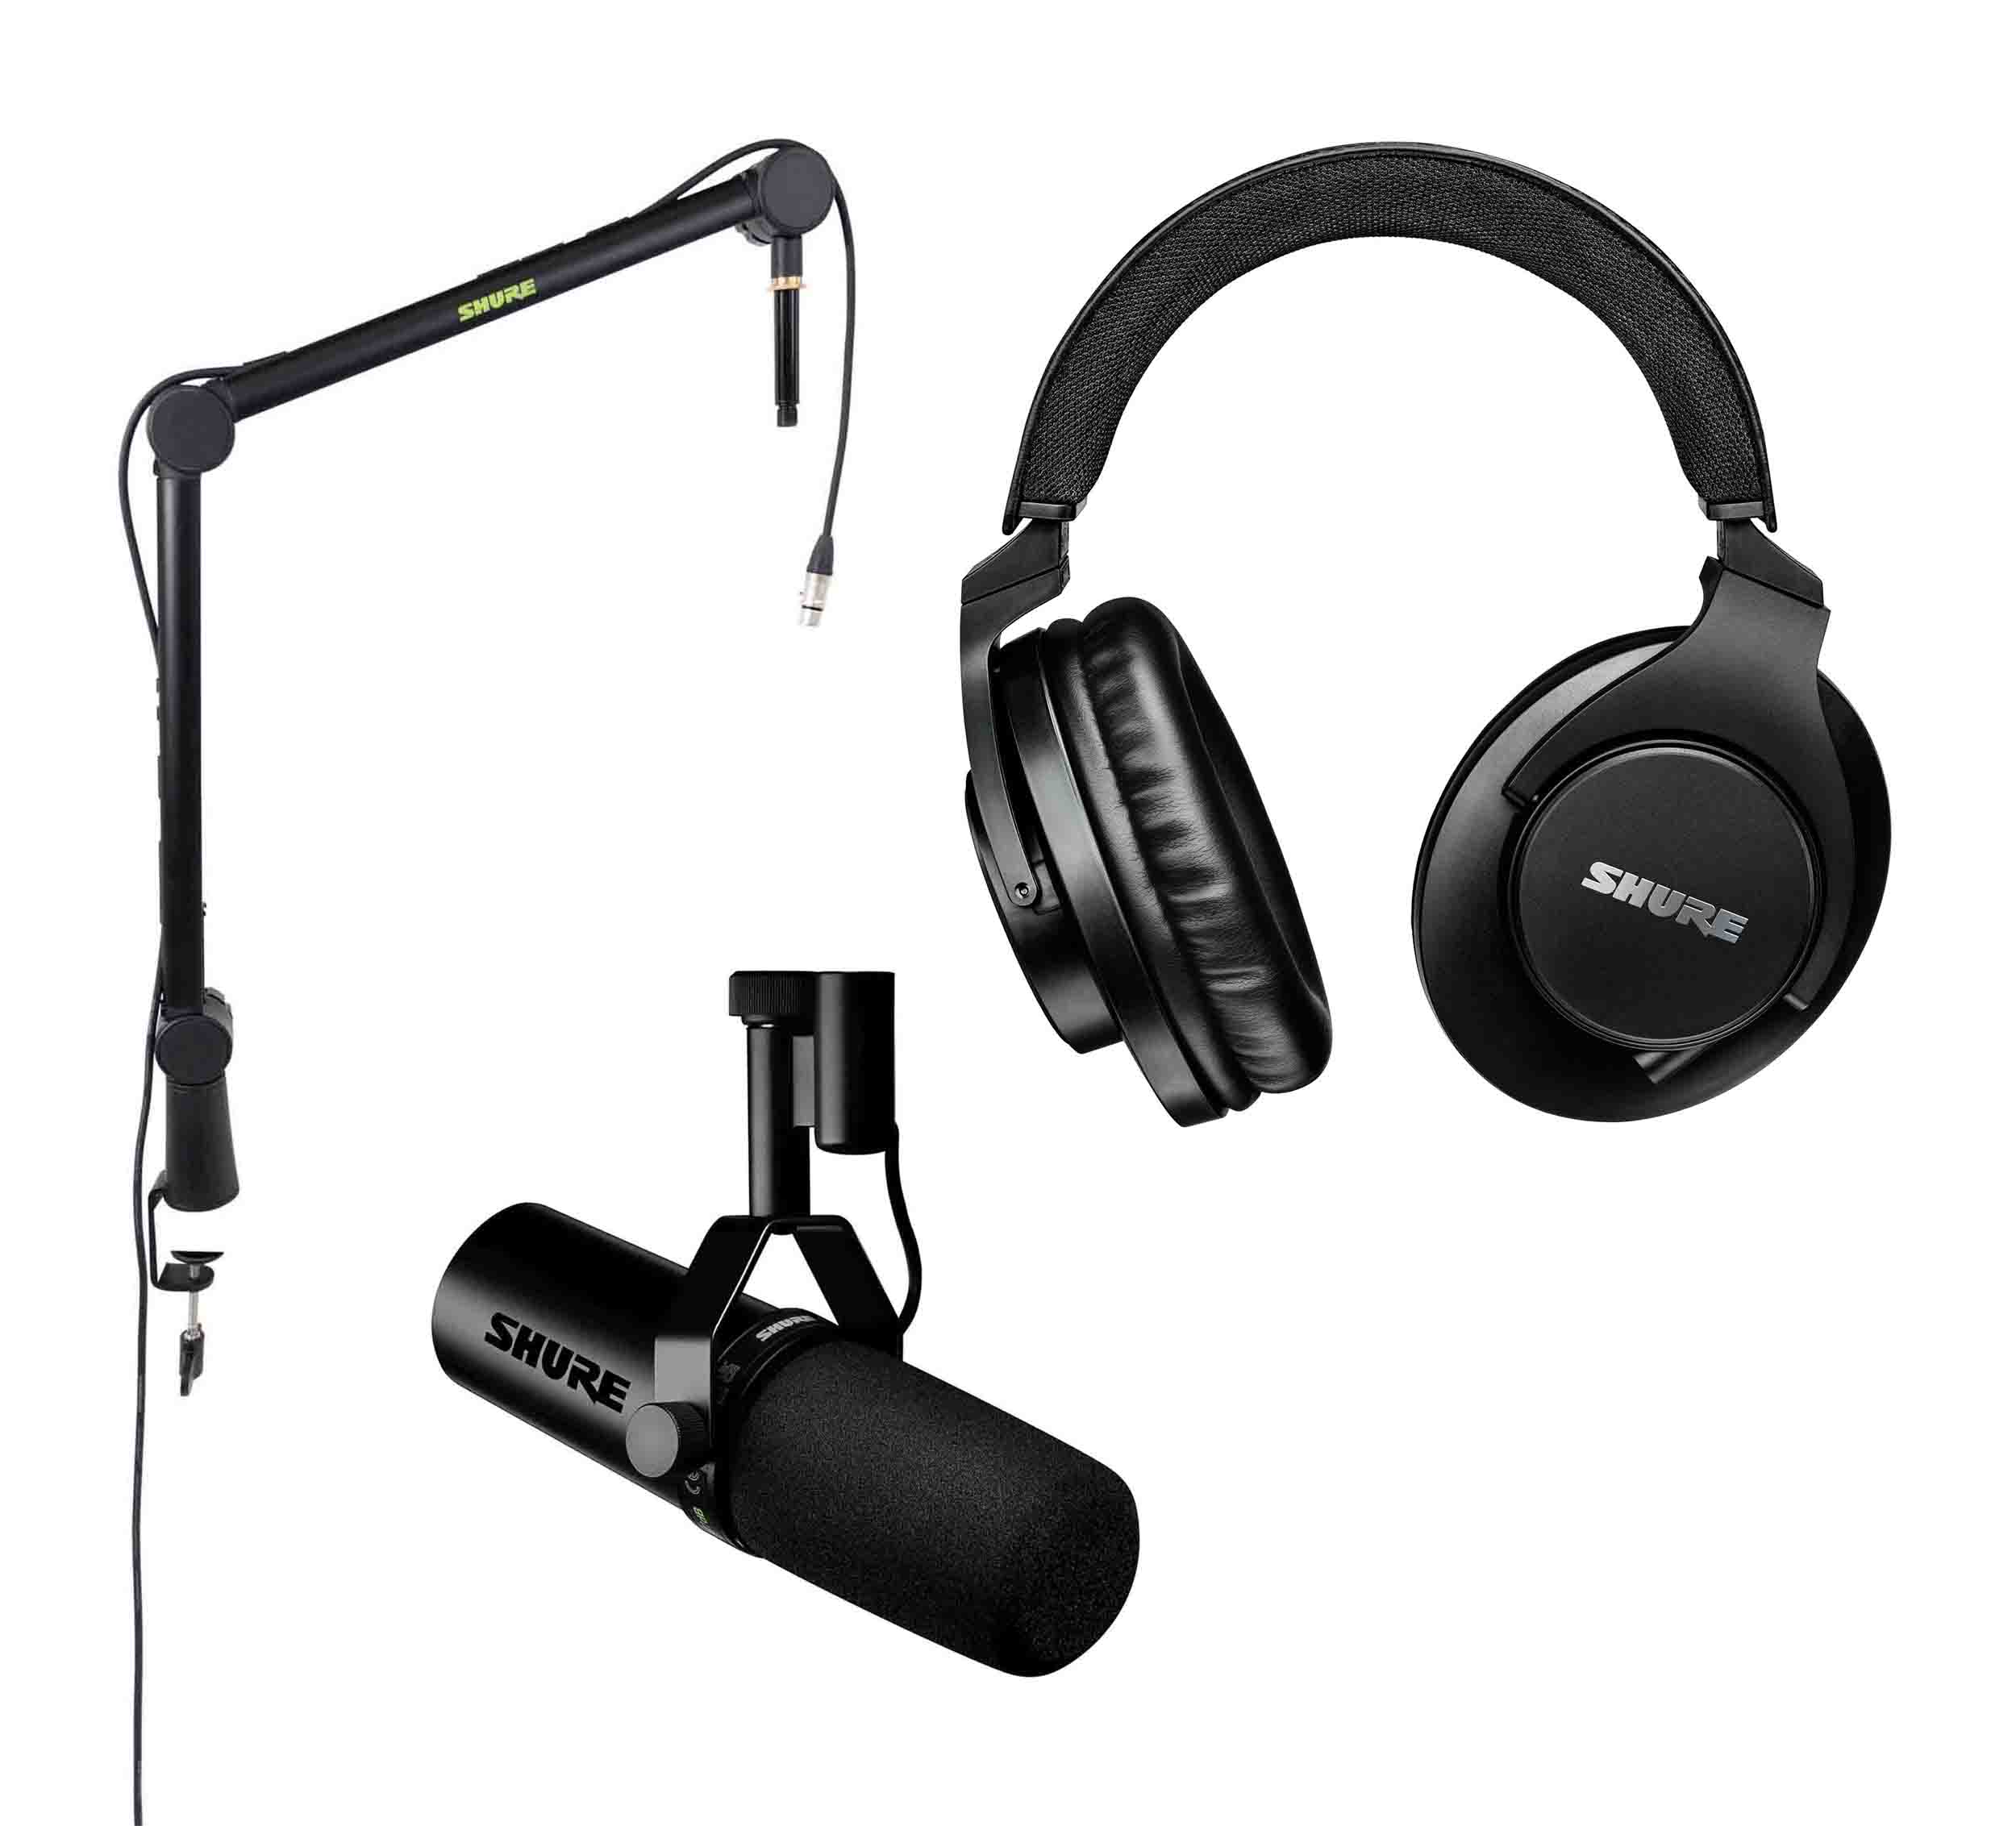 Shure MV7 Podcast Microphone Kit with Mic Stand and Headphones (Black)